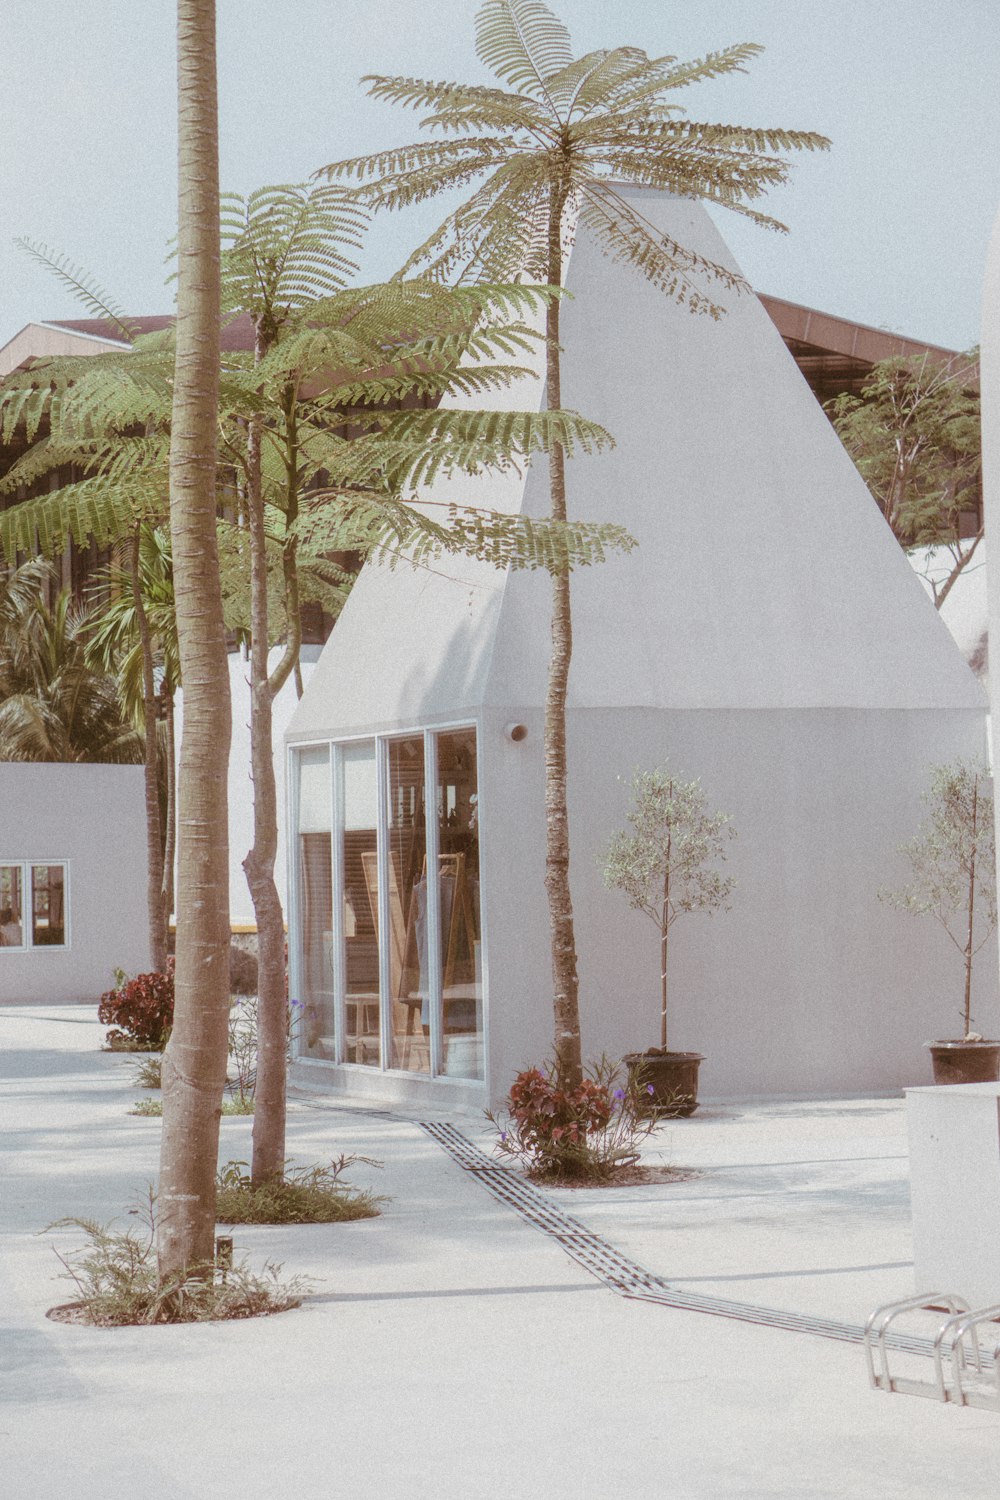 white concrete building near palm trees during daytime